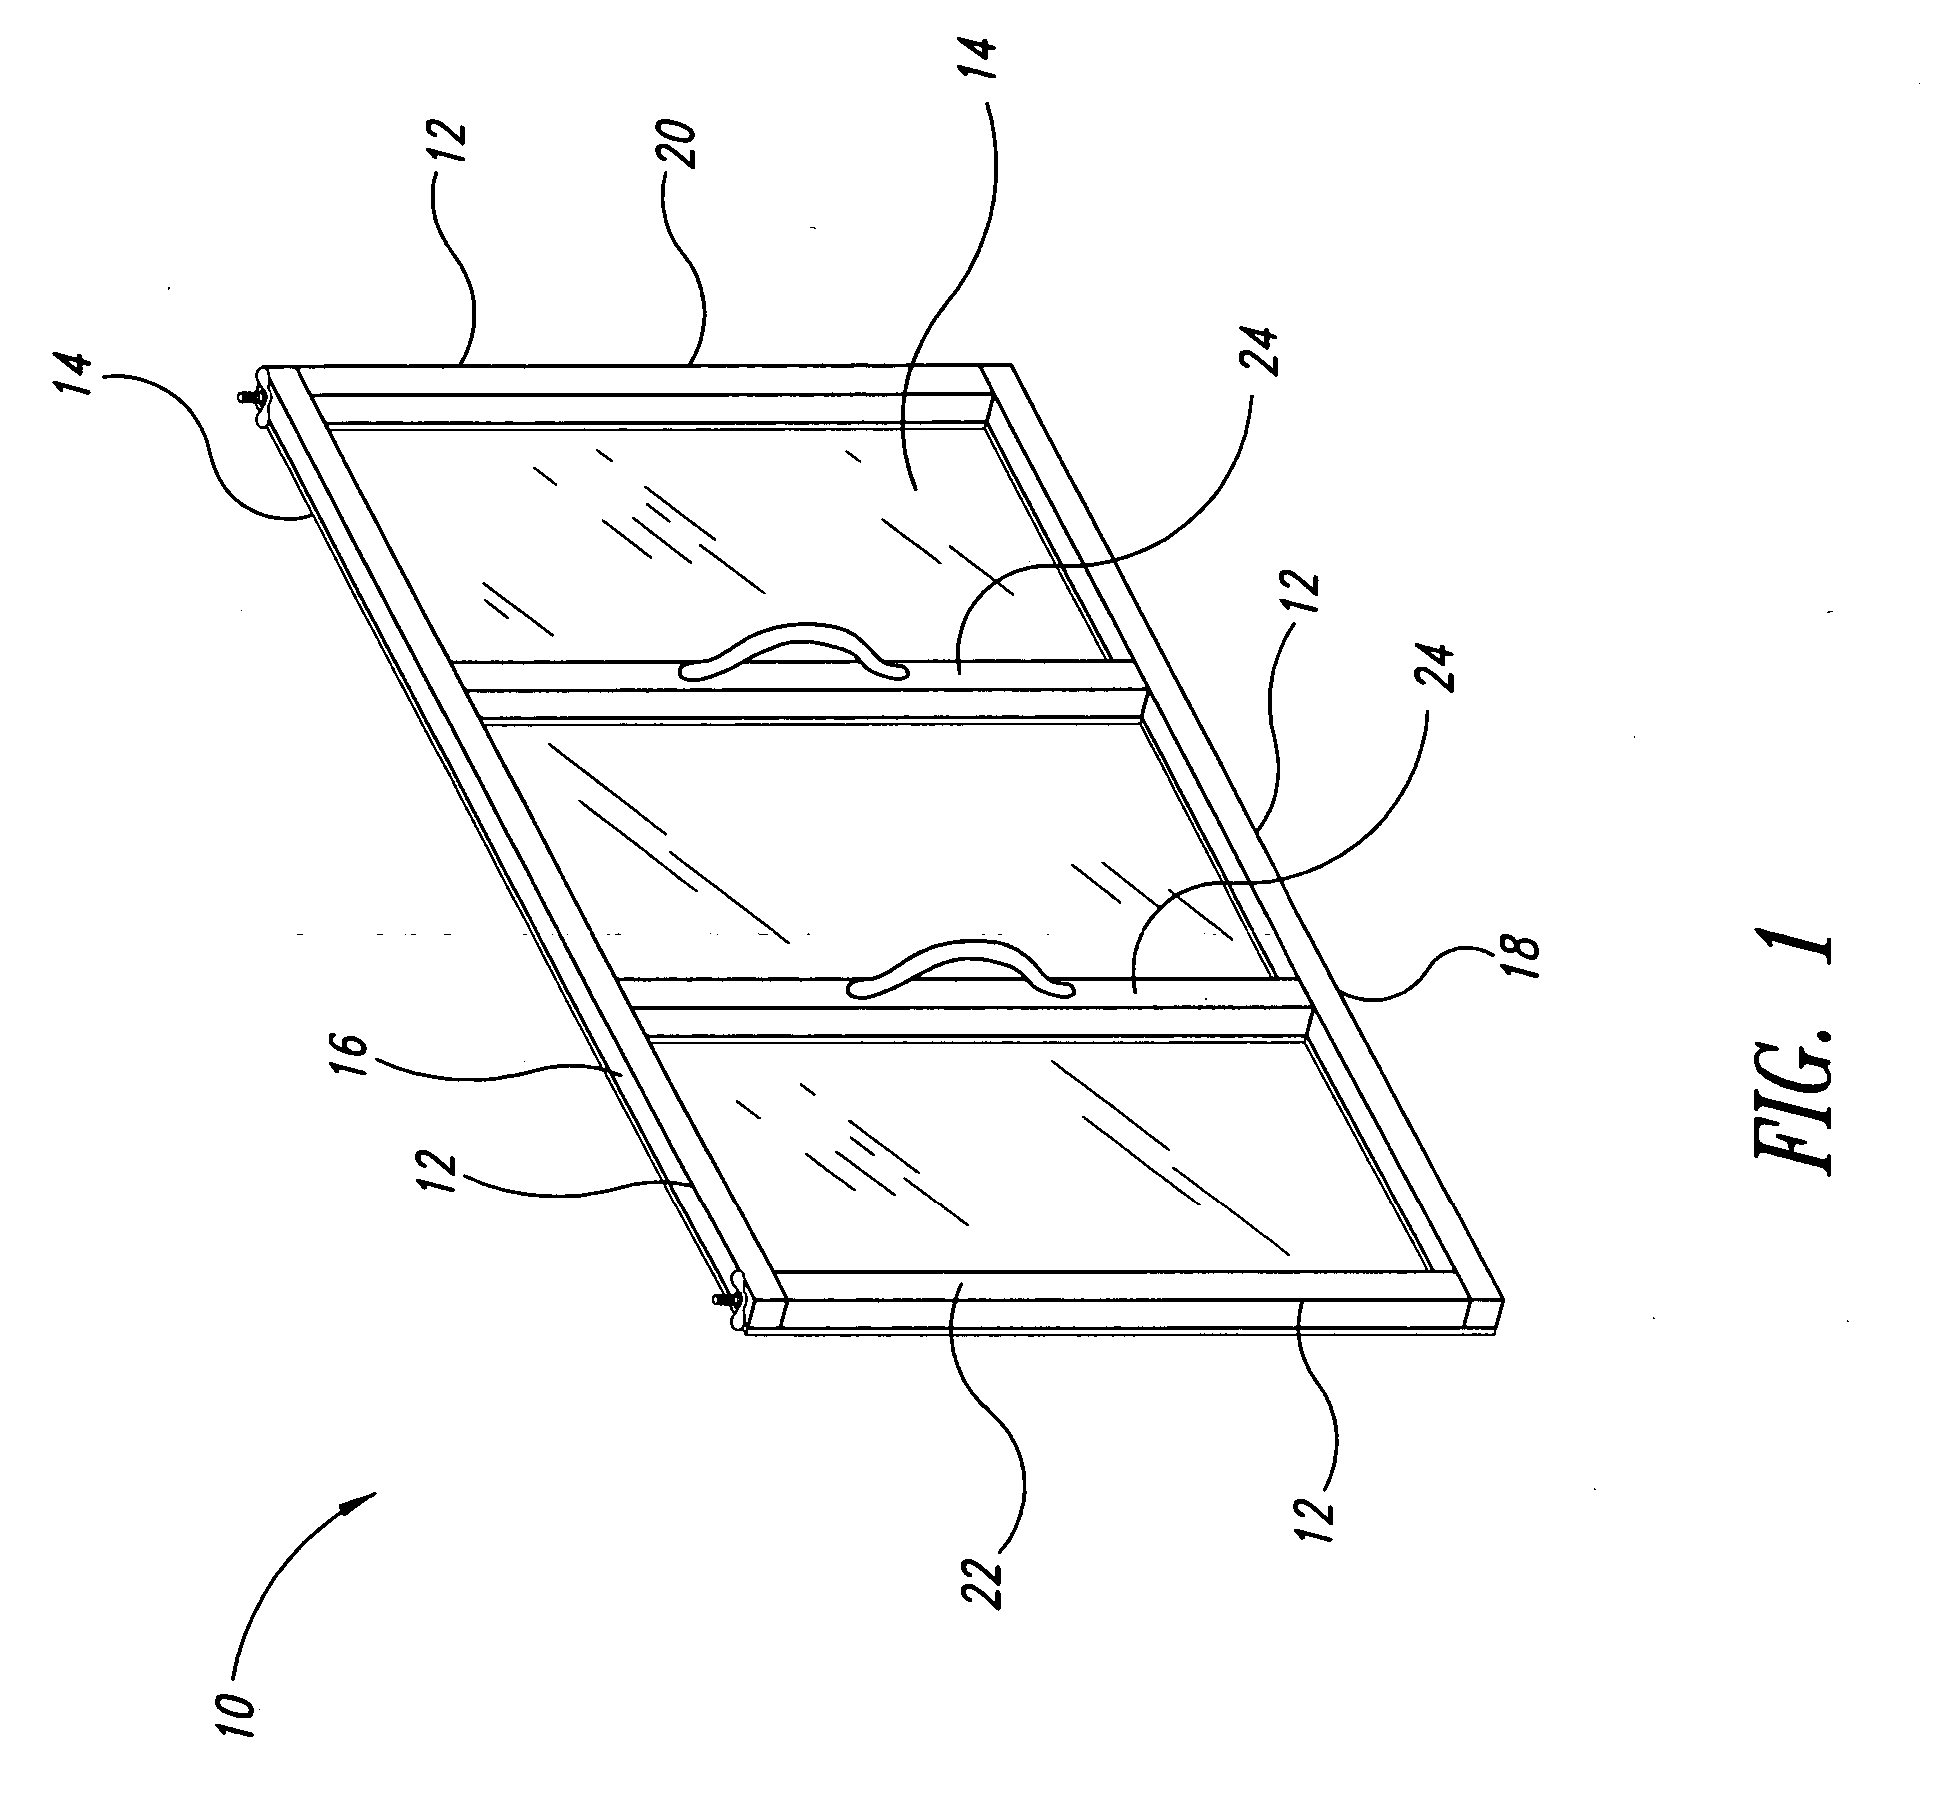 Spray shield and methods of using the same